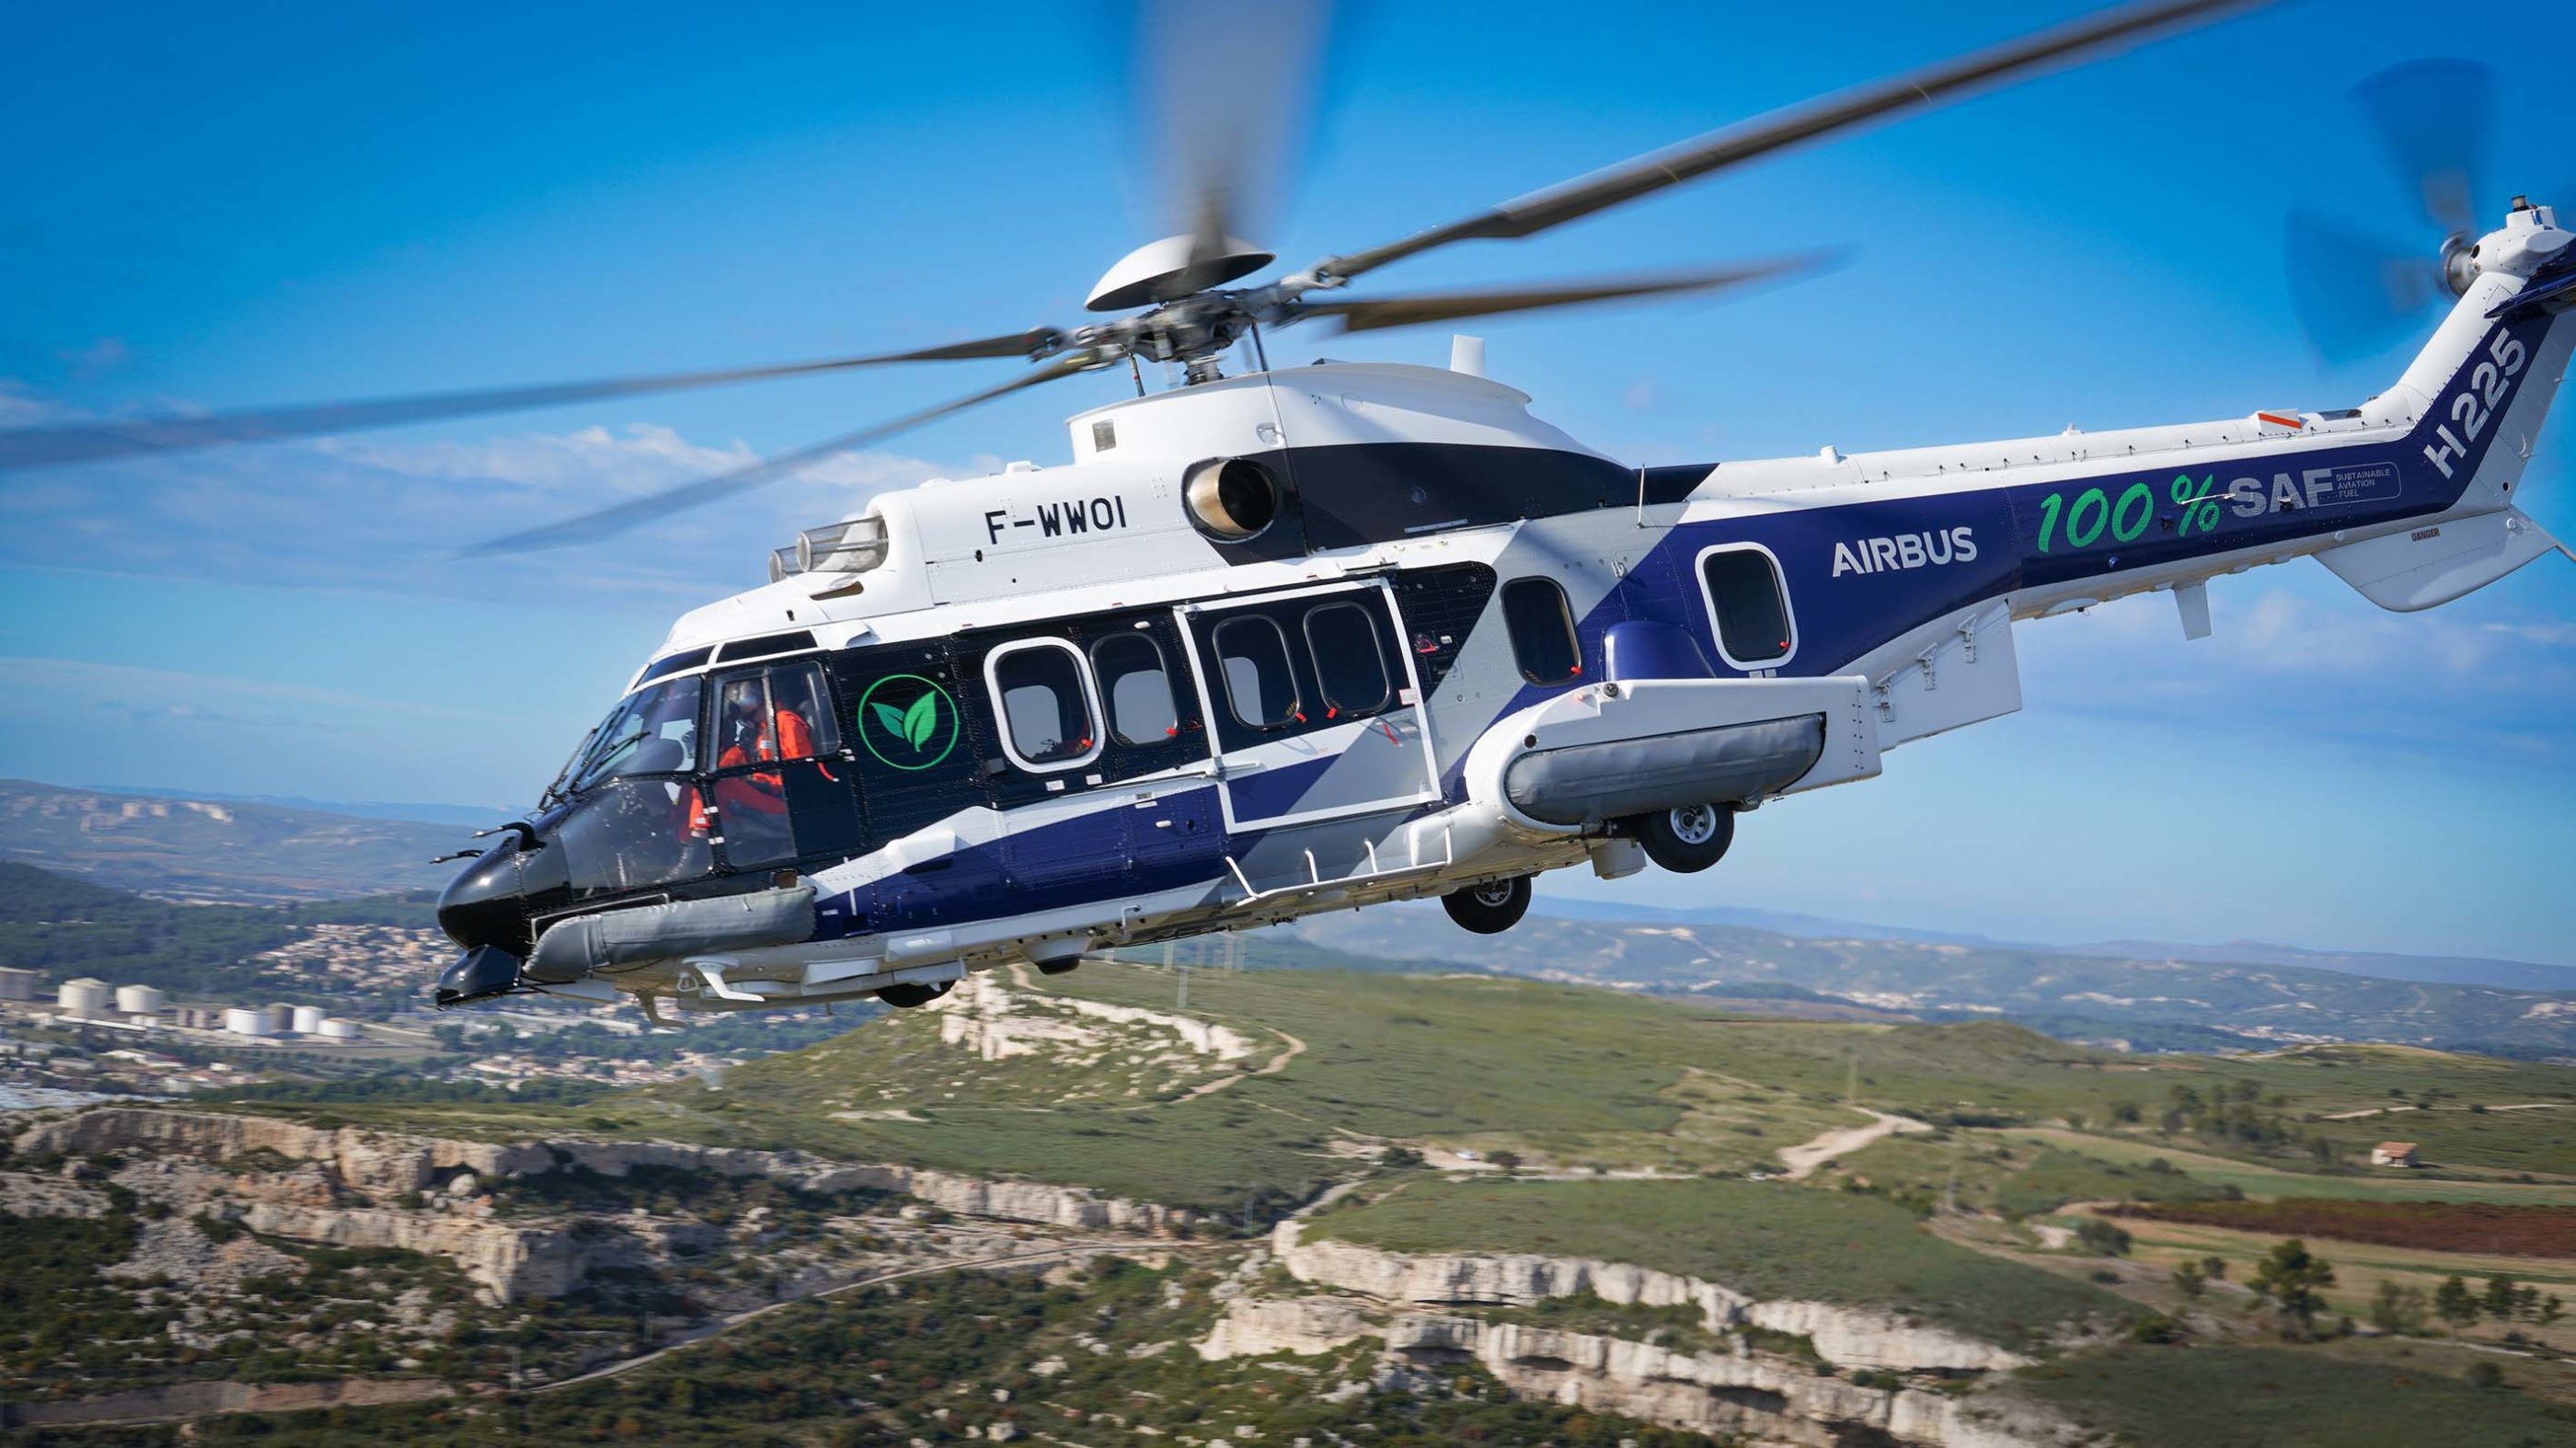 The first flight of a Safran-powered helicopter using 100 percent SAF took place in November in Marignane, France. The aircraft was an Airbus H225, powered by Safran Makila 2 engines. Airbus Helicopters Photo